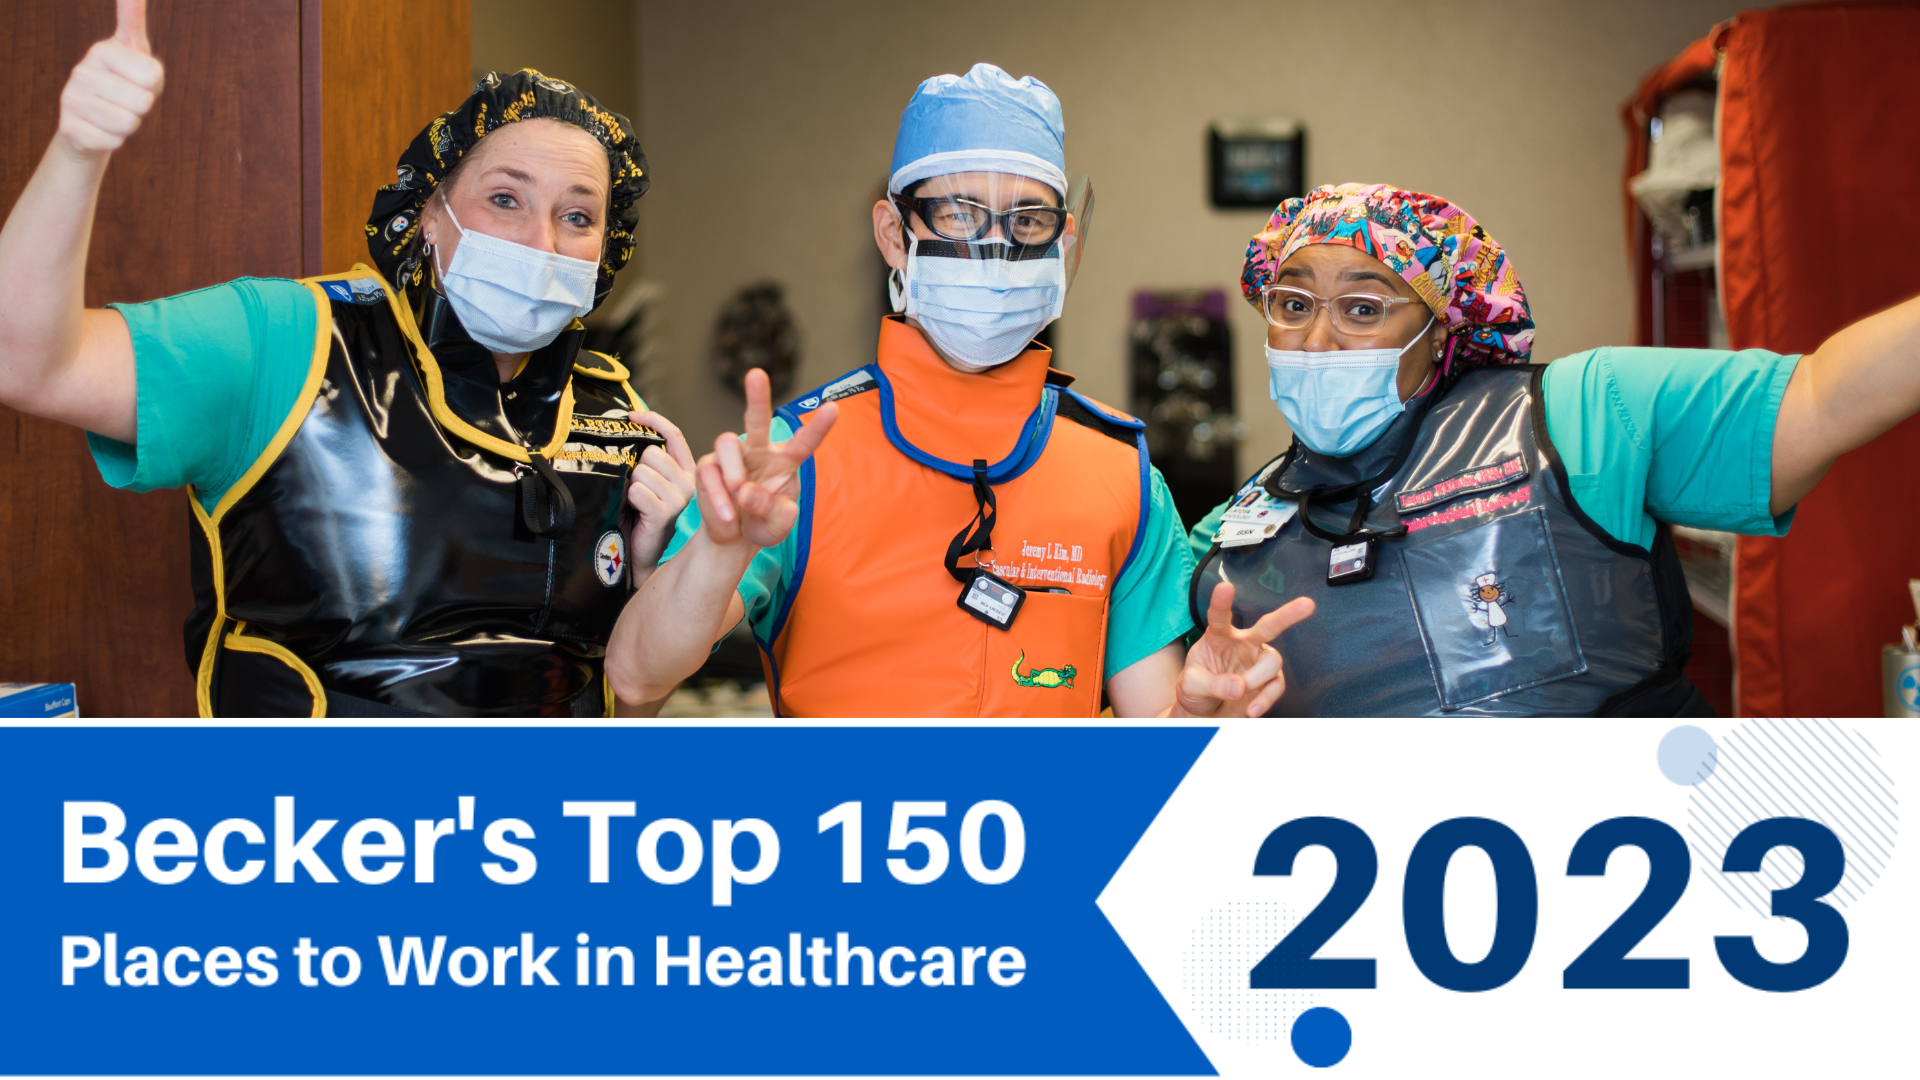 Atrium Health Named to Becker’s Healthcare “150 Top Places to Work in